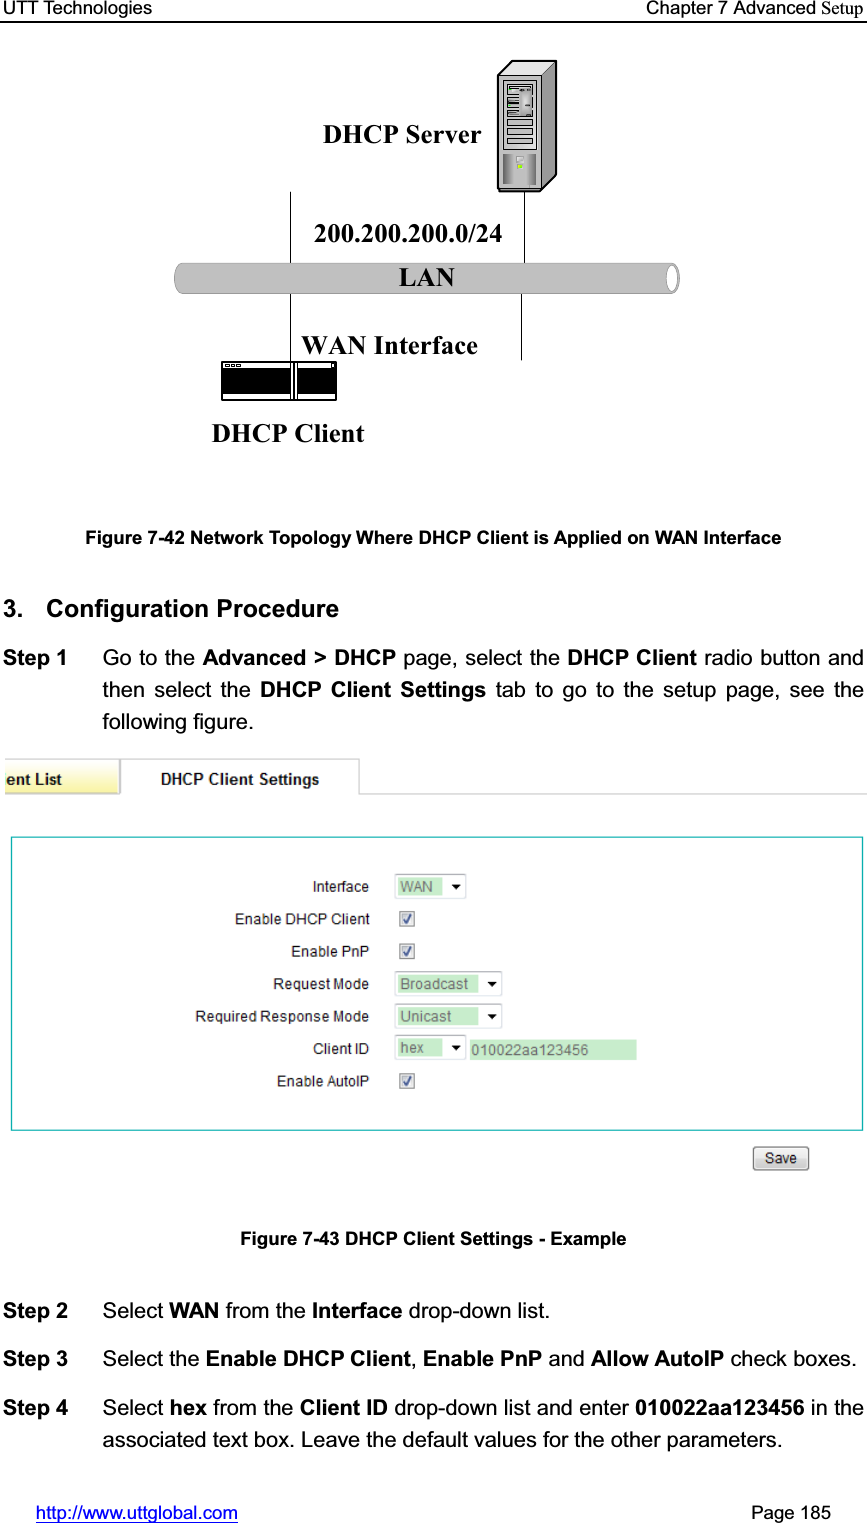 UTT Technologies    Chapter 7 Advanced Setuphttp://www.uttglobal.com                                                       Page 185 LANDHCP ServerDHCP Client200.200.200.0/24WAN InterfaceFigure 7-42 Network Topology Where DHCP Client is Applied on WAN Interface 3. Configuration Procedure Step 1  Go to the Advanced &gt; DHCP page, select the DHCP Client radio button and then select the DHCP Client Settings tab to go to the setup page, see the following figure. Figure 7-43 DHCP Client Settings - Example Step 2  Select WAN from the Interface drop-down list. Step 3  Select the Enable DHCP Client,Enable PnP and Allow AutoIP check boxes. Step 4  Select hex from the Client ID drop-down list and enter 010022aa123456 in the associated text box. Leave the default values for the other parameters. 